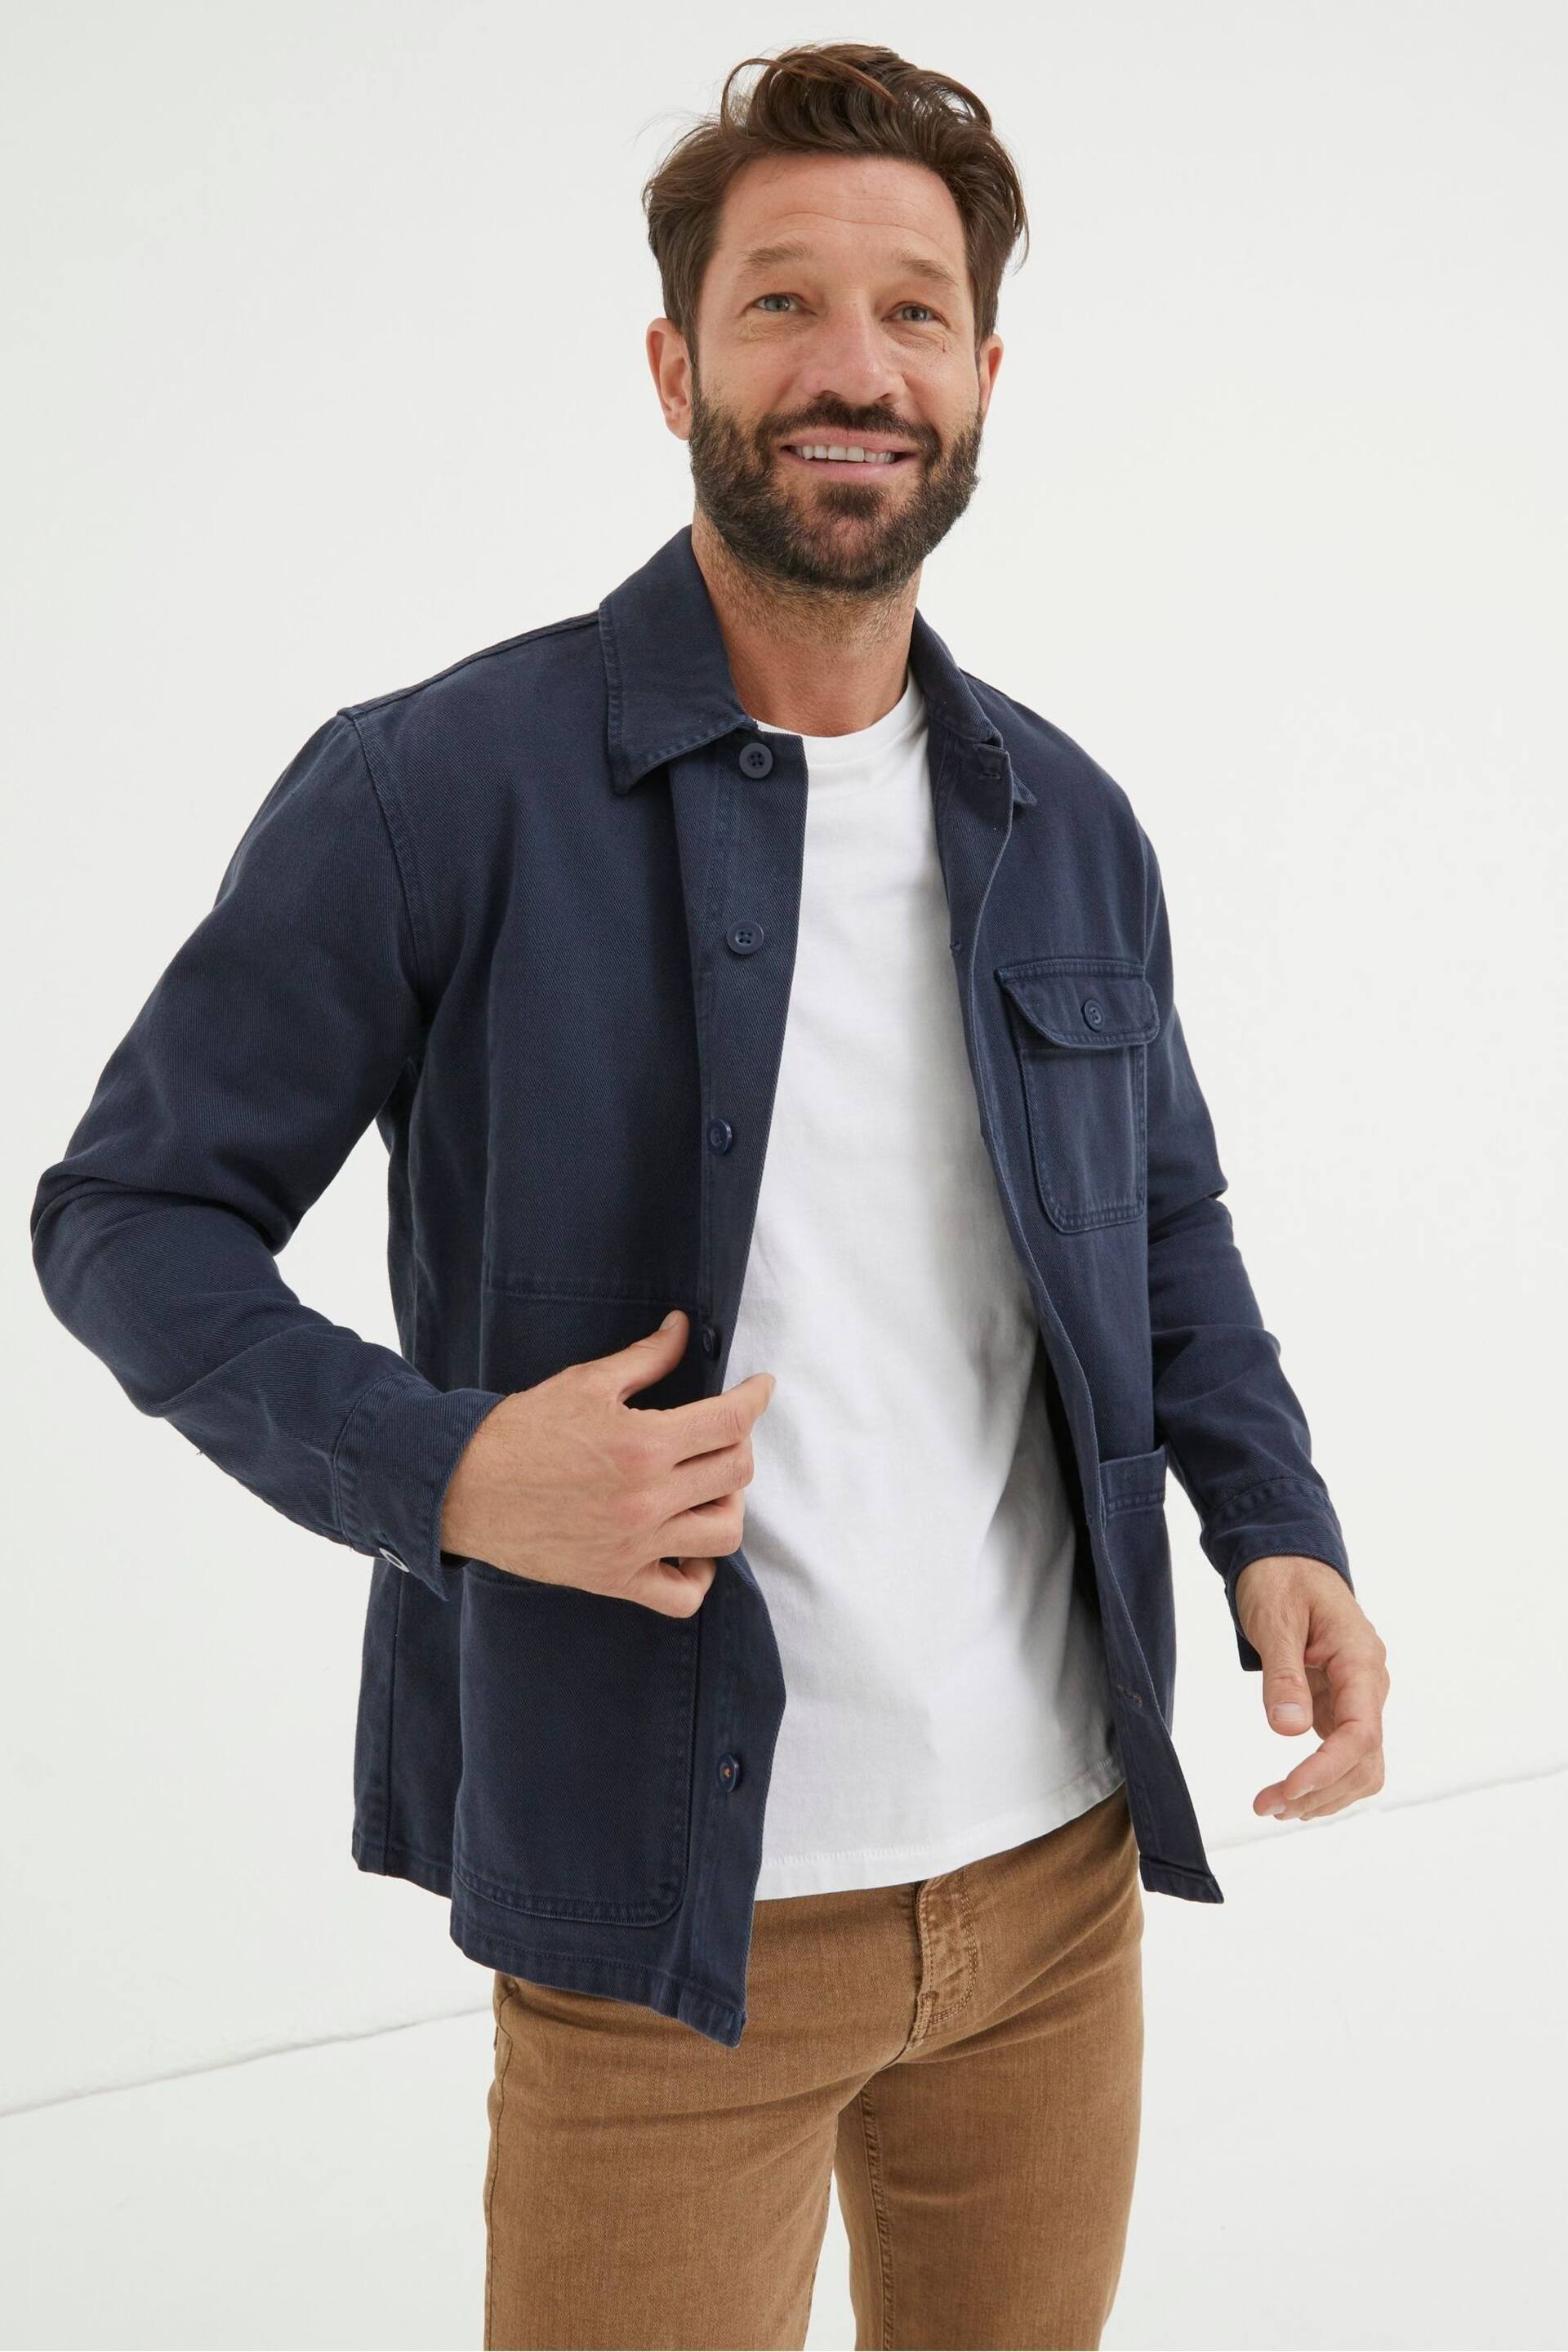 FatFace Blue Worker Jacket - Image 1 of 5